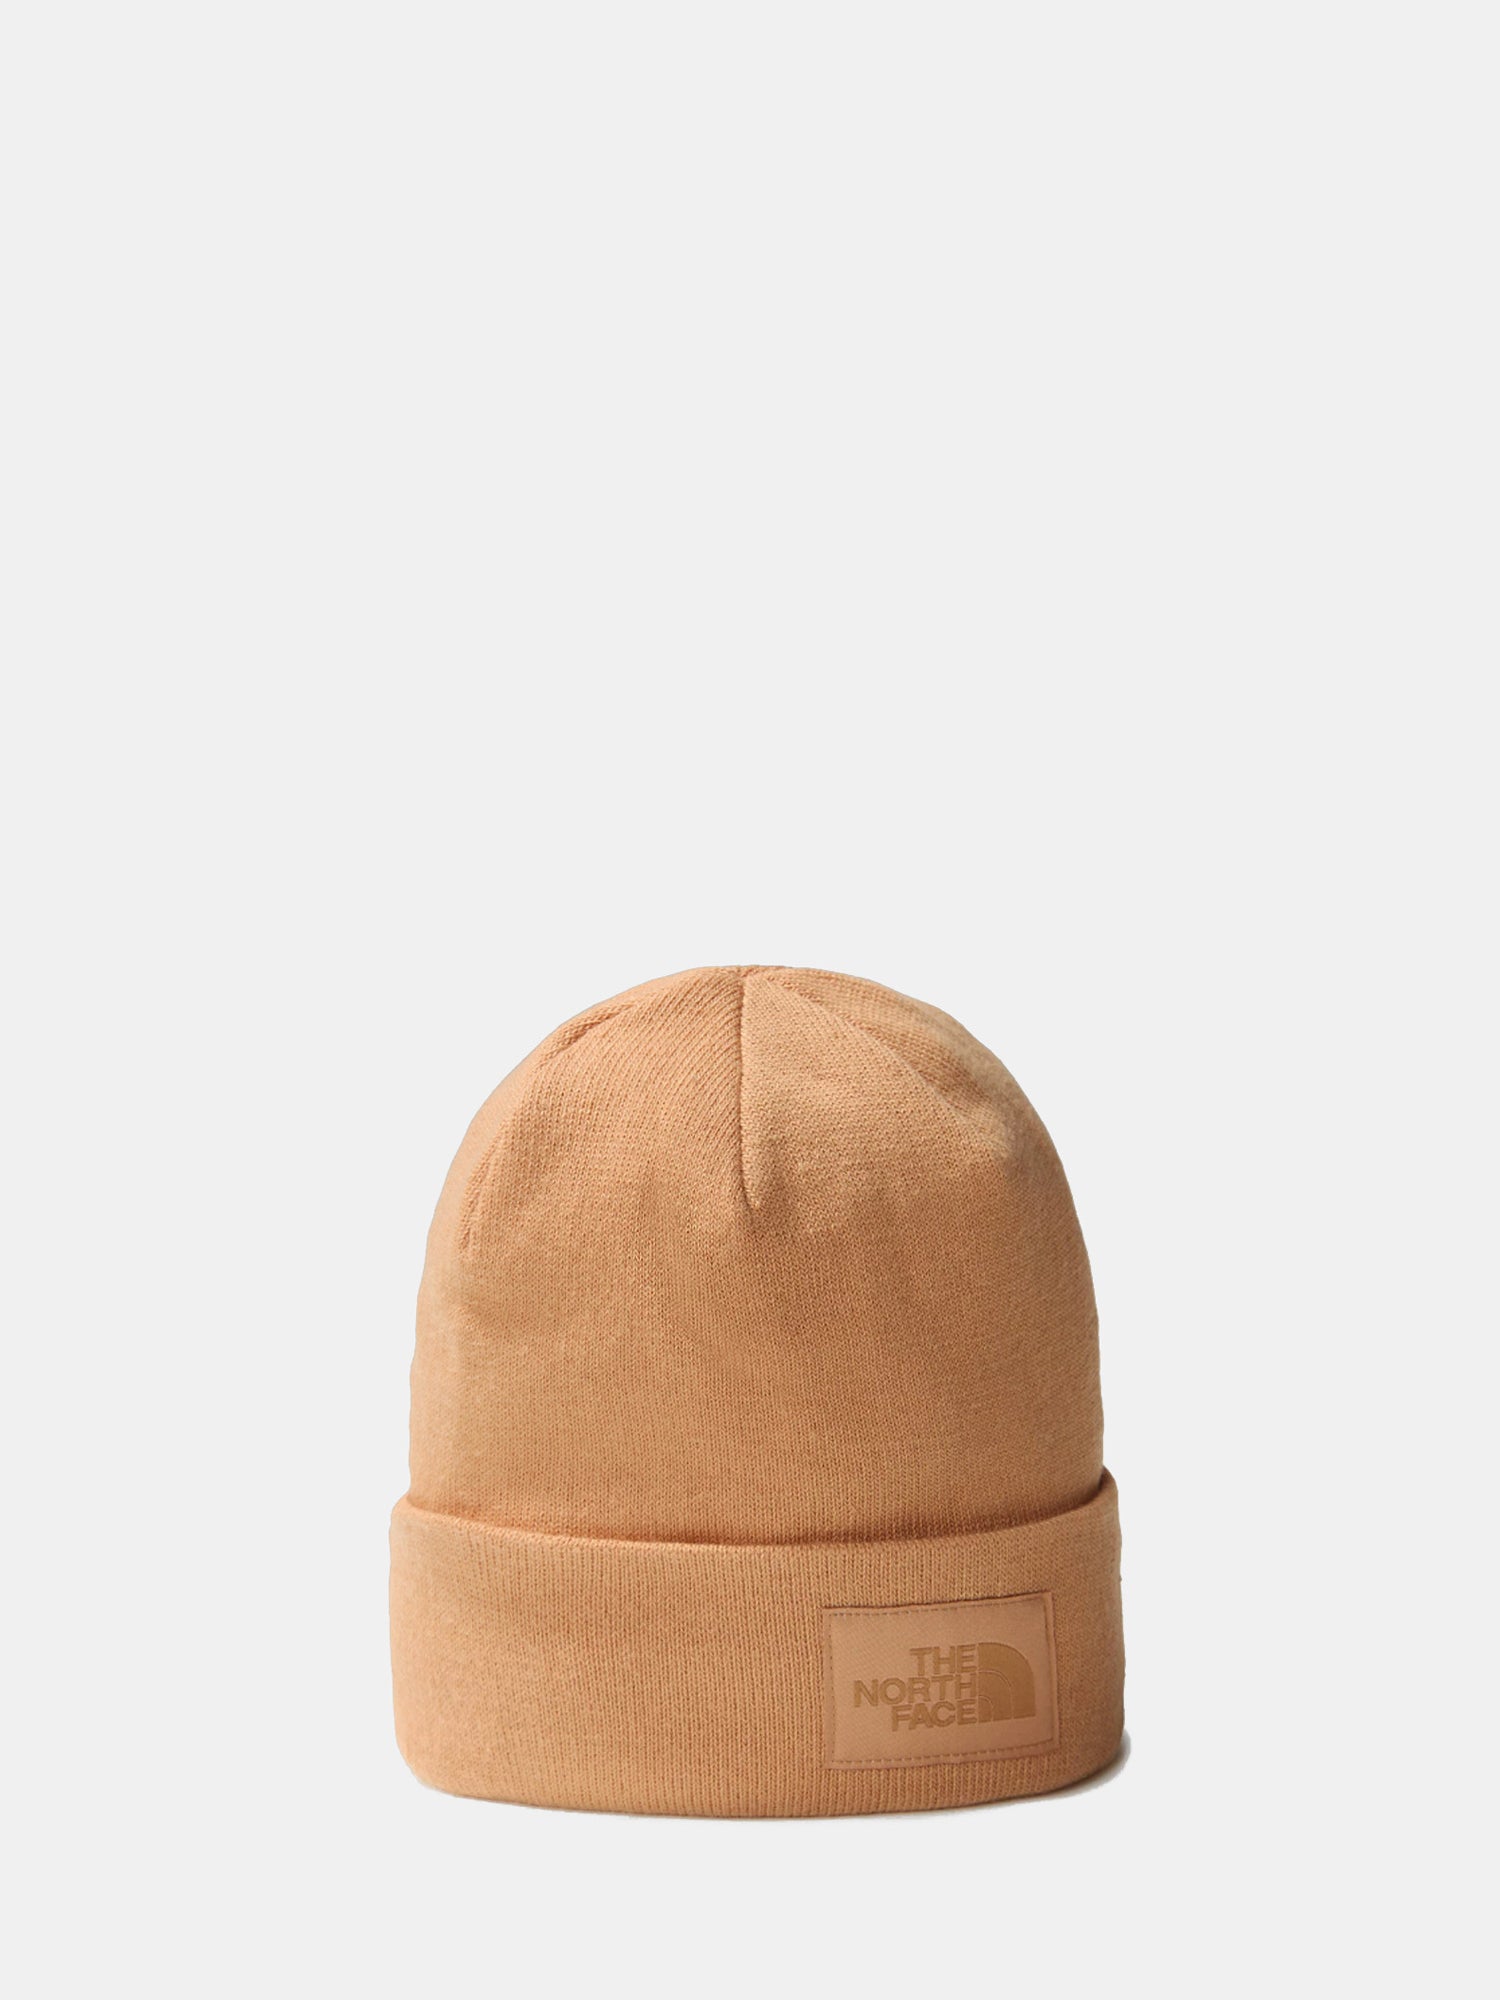 THE NORTH FACE CAPPELLO DOCK WORKER BEIGE